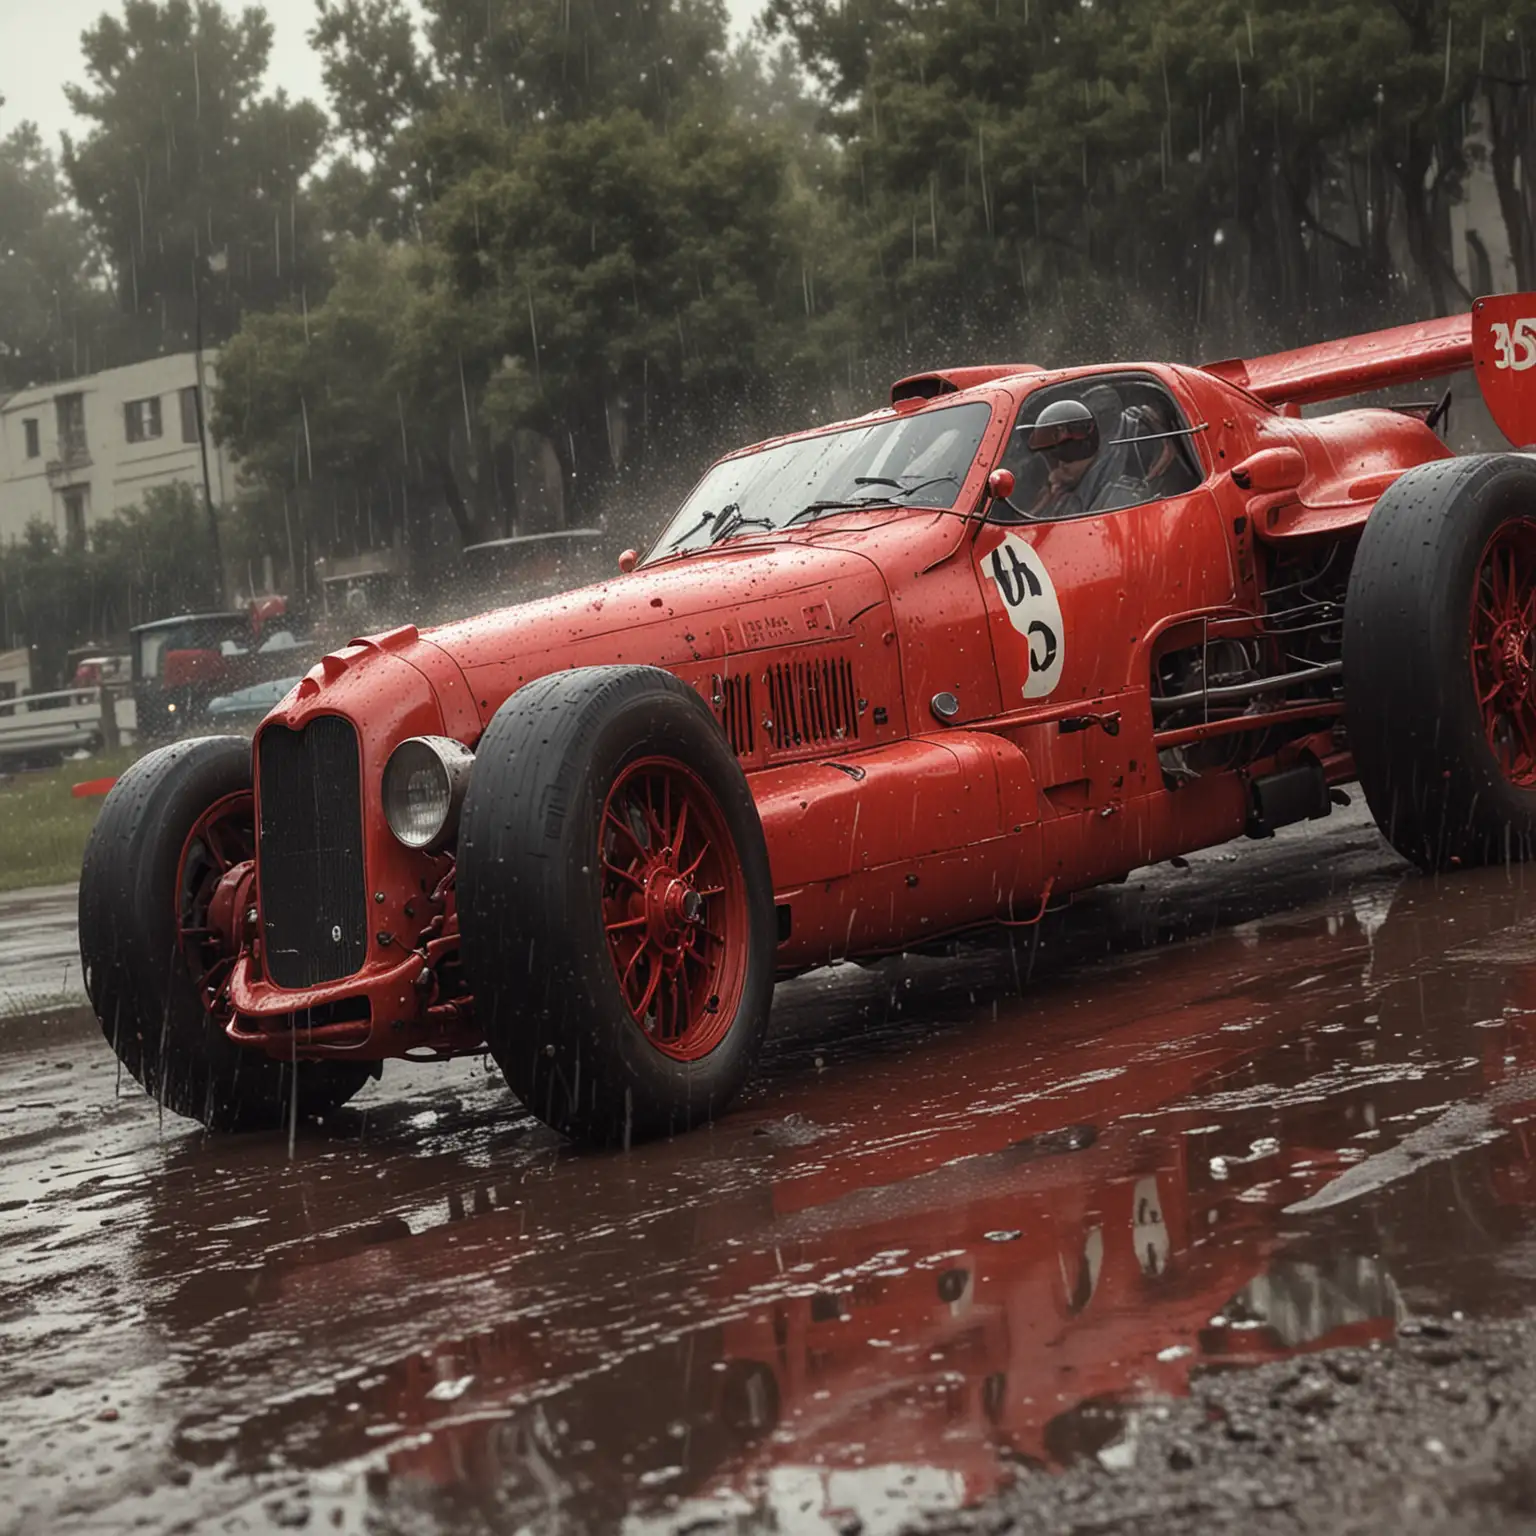 Vintage Red Race Car in Monochromatic Realism Style